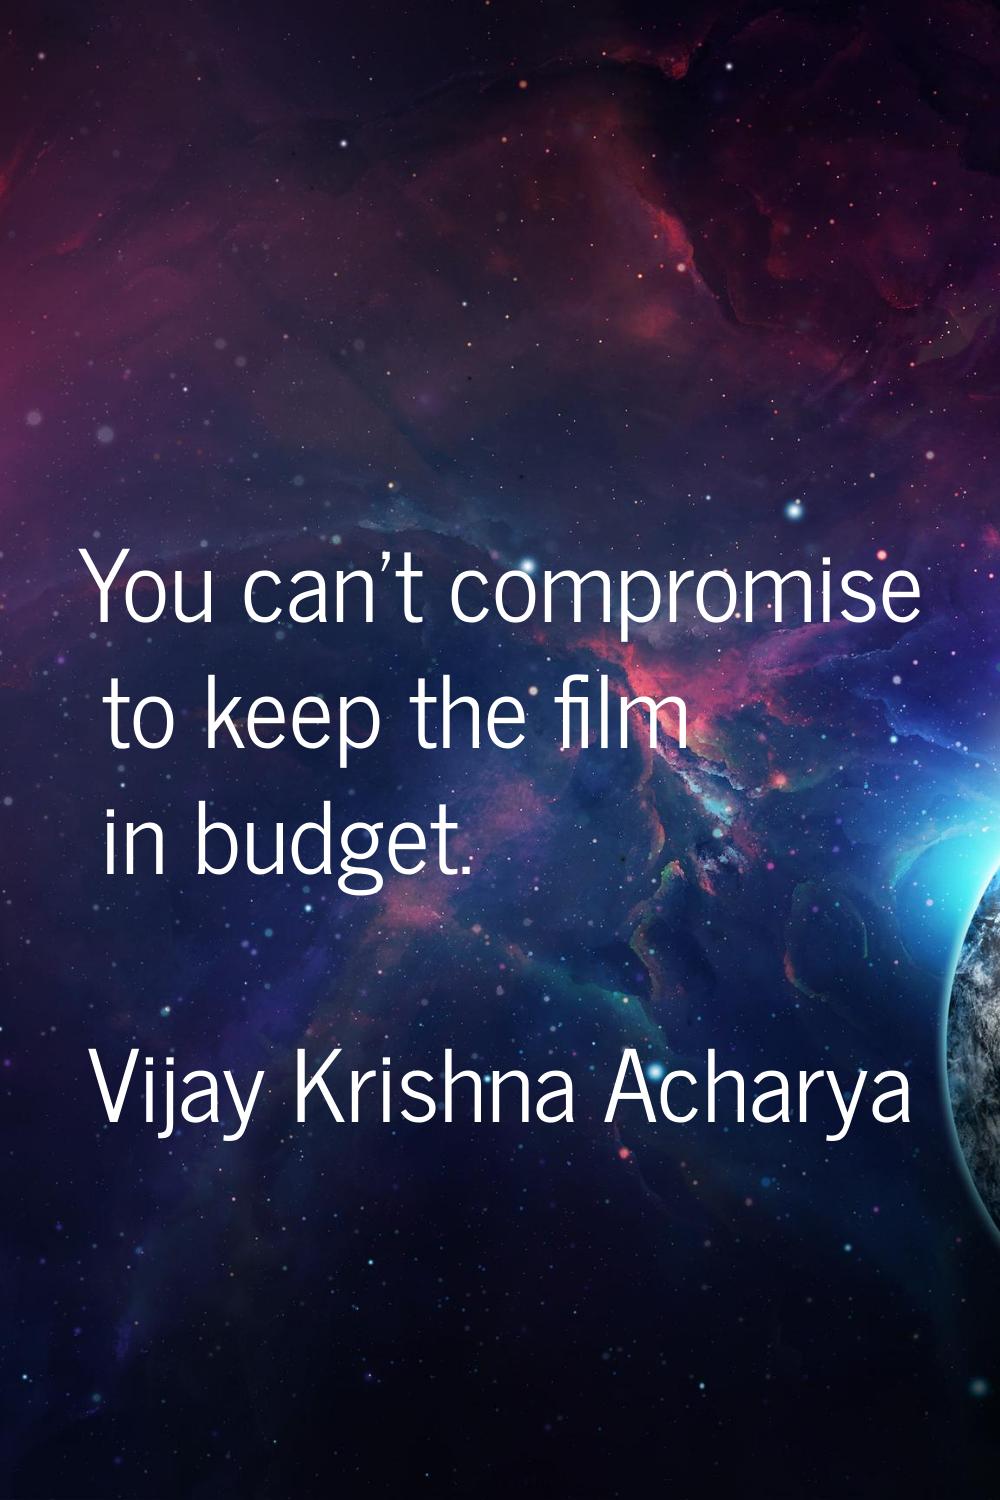 You can't compromise to keep the film in budget.